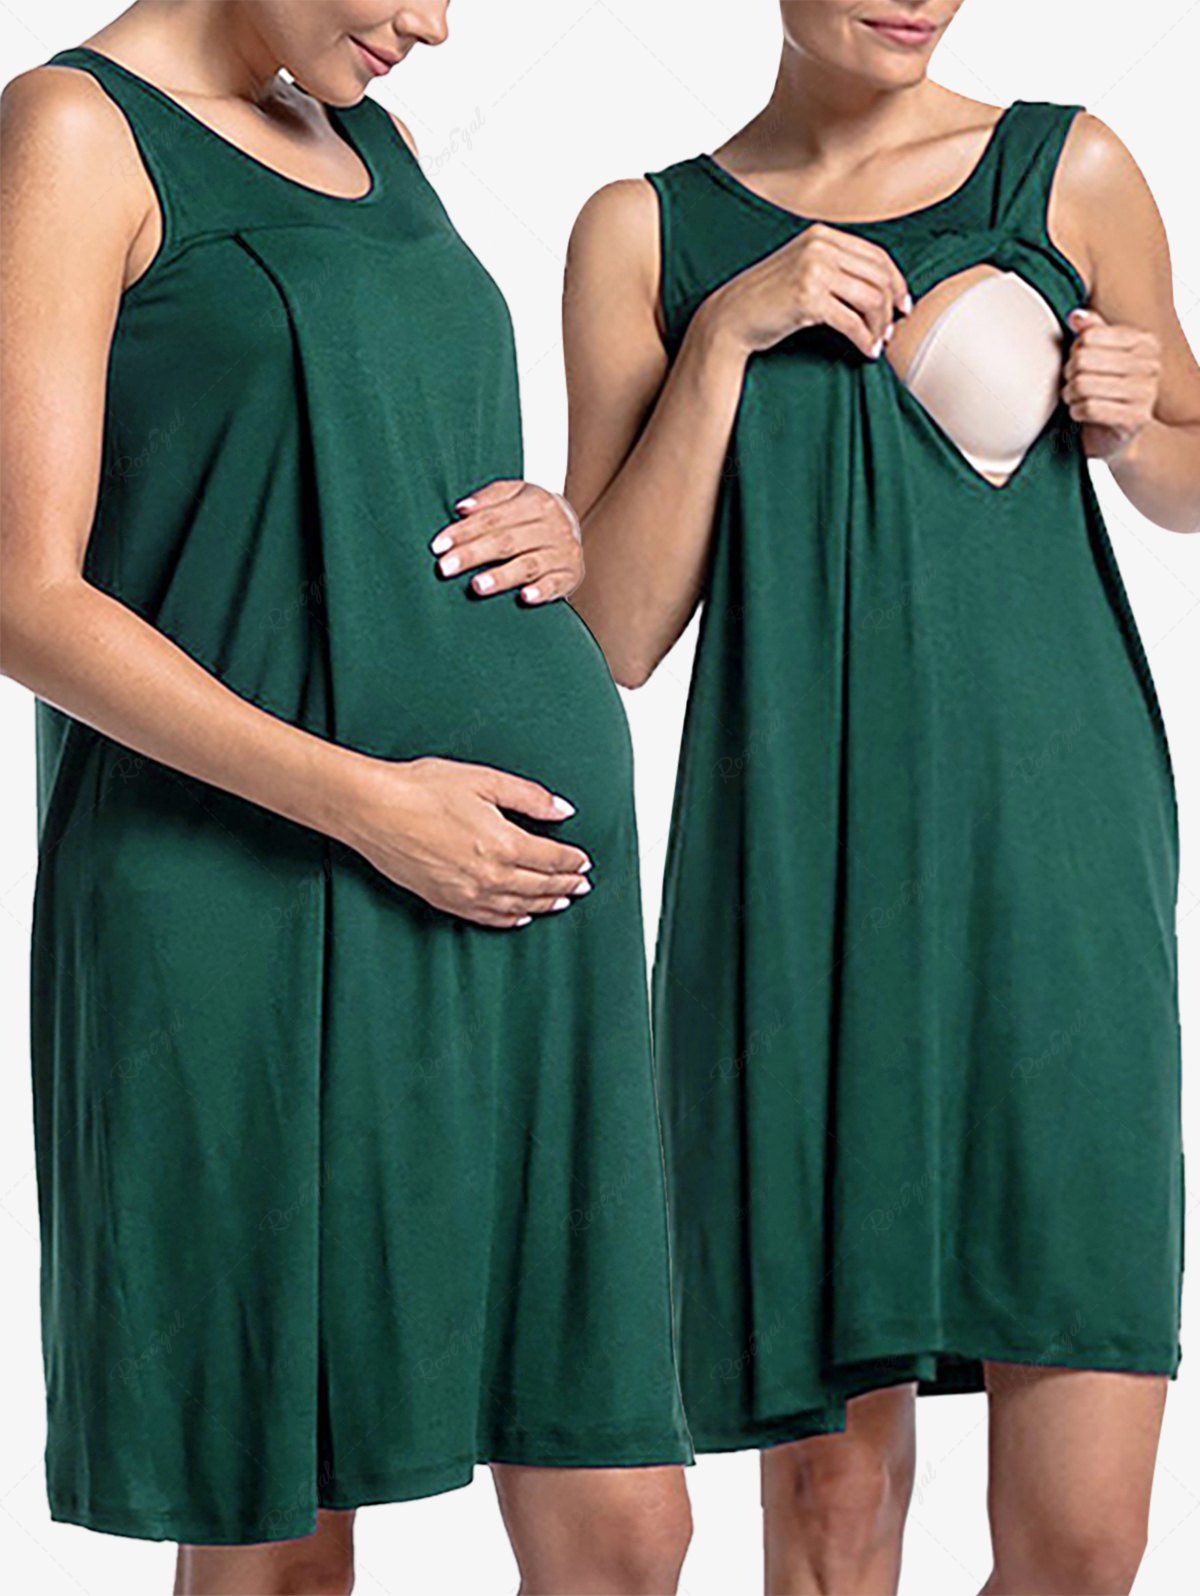 Chic Plus Size Sleeveless Solid Color Ripped Tank Maternity Nursing Dress  